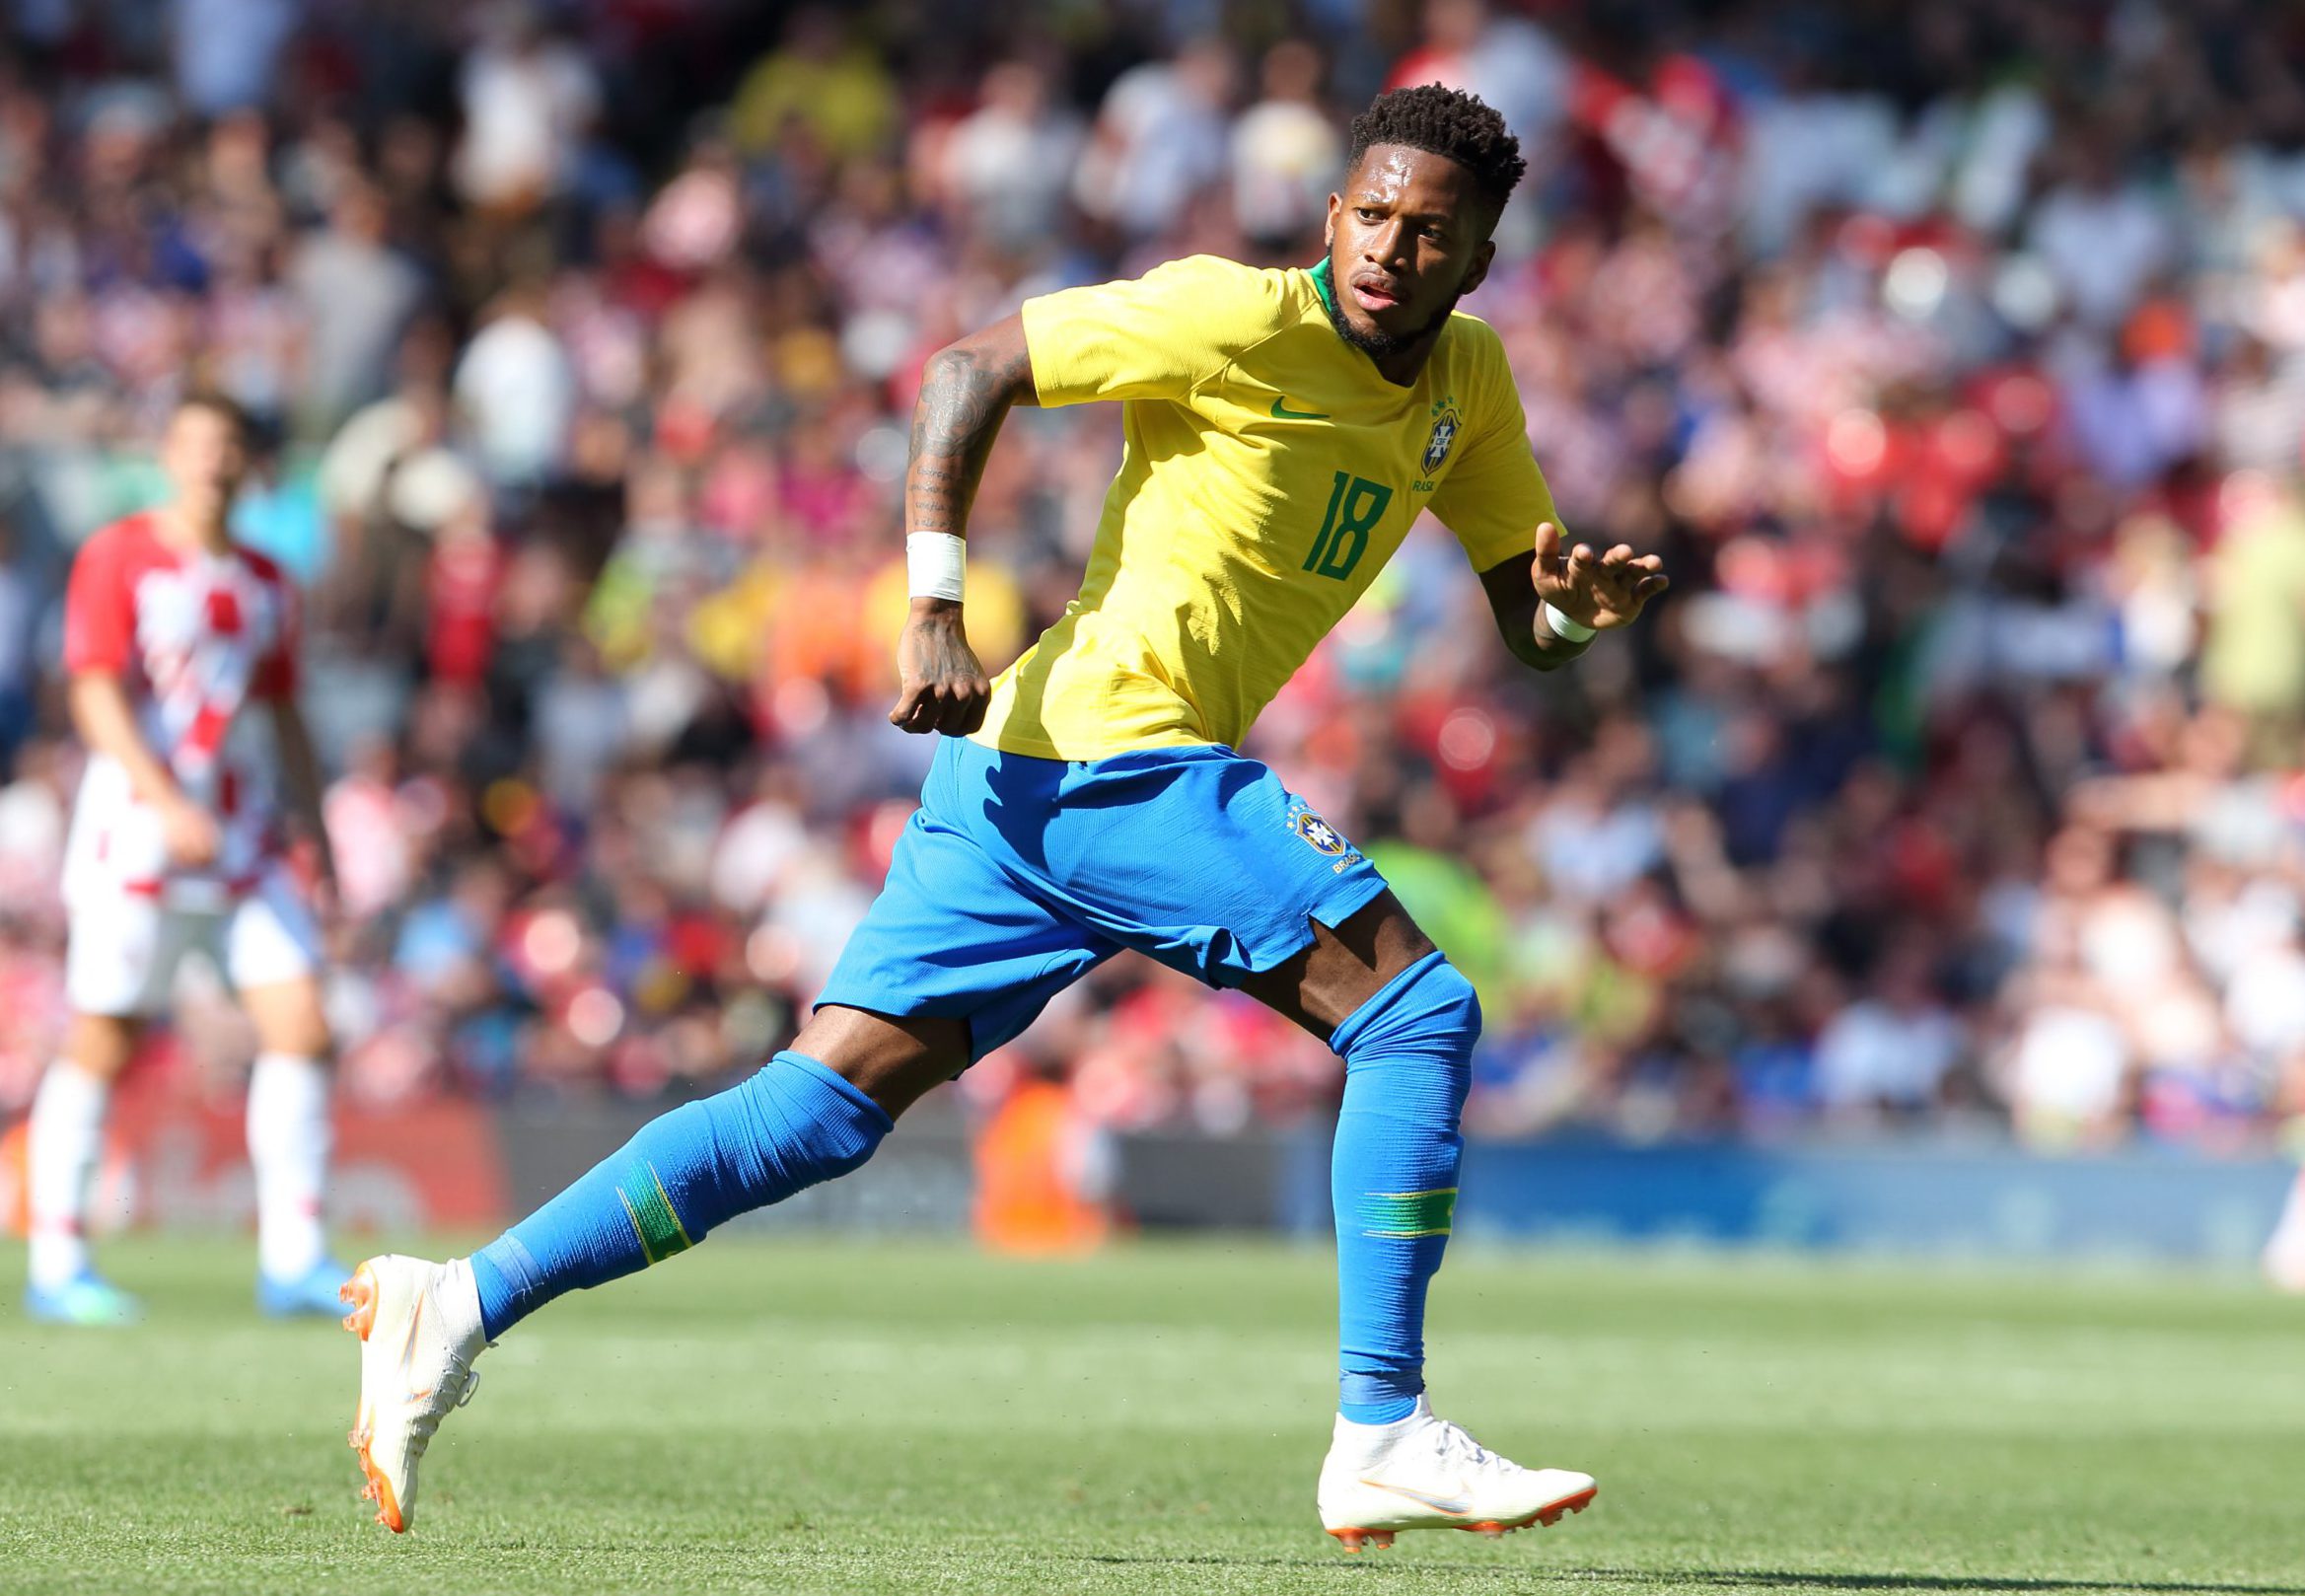 Fred speaks out on £52m Manchester United transfer with Brazil midfielder set for medical on Monday